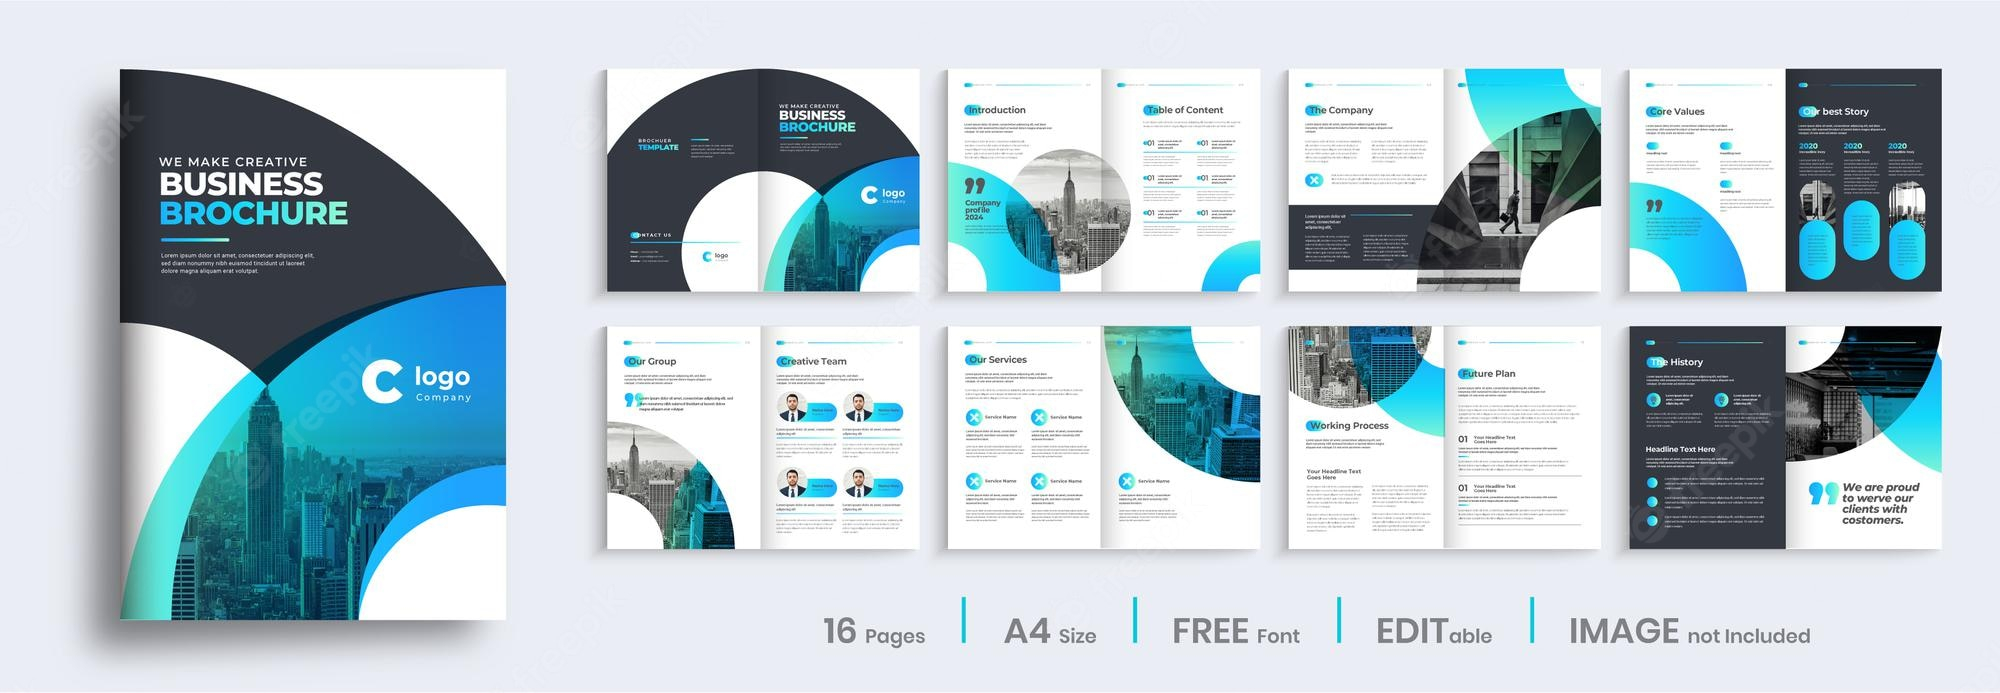 Brochure template Vectors & Illustrations for Free Download  Freepik With Regard To Ai Brochure Templates Free Download